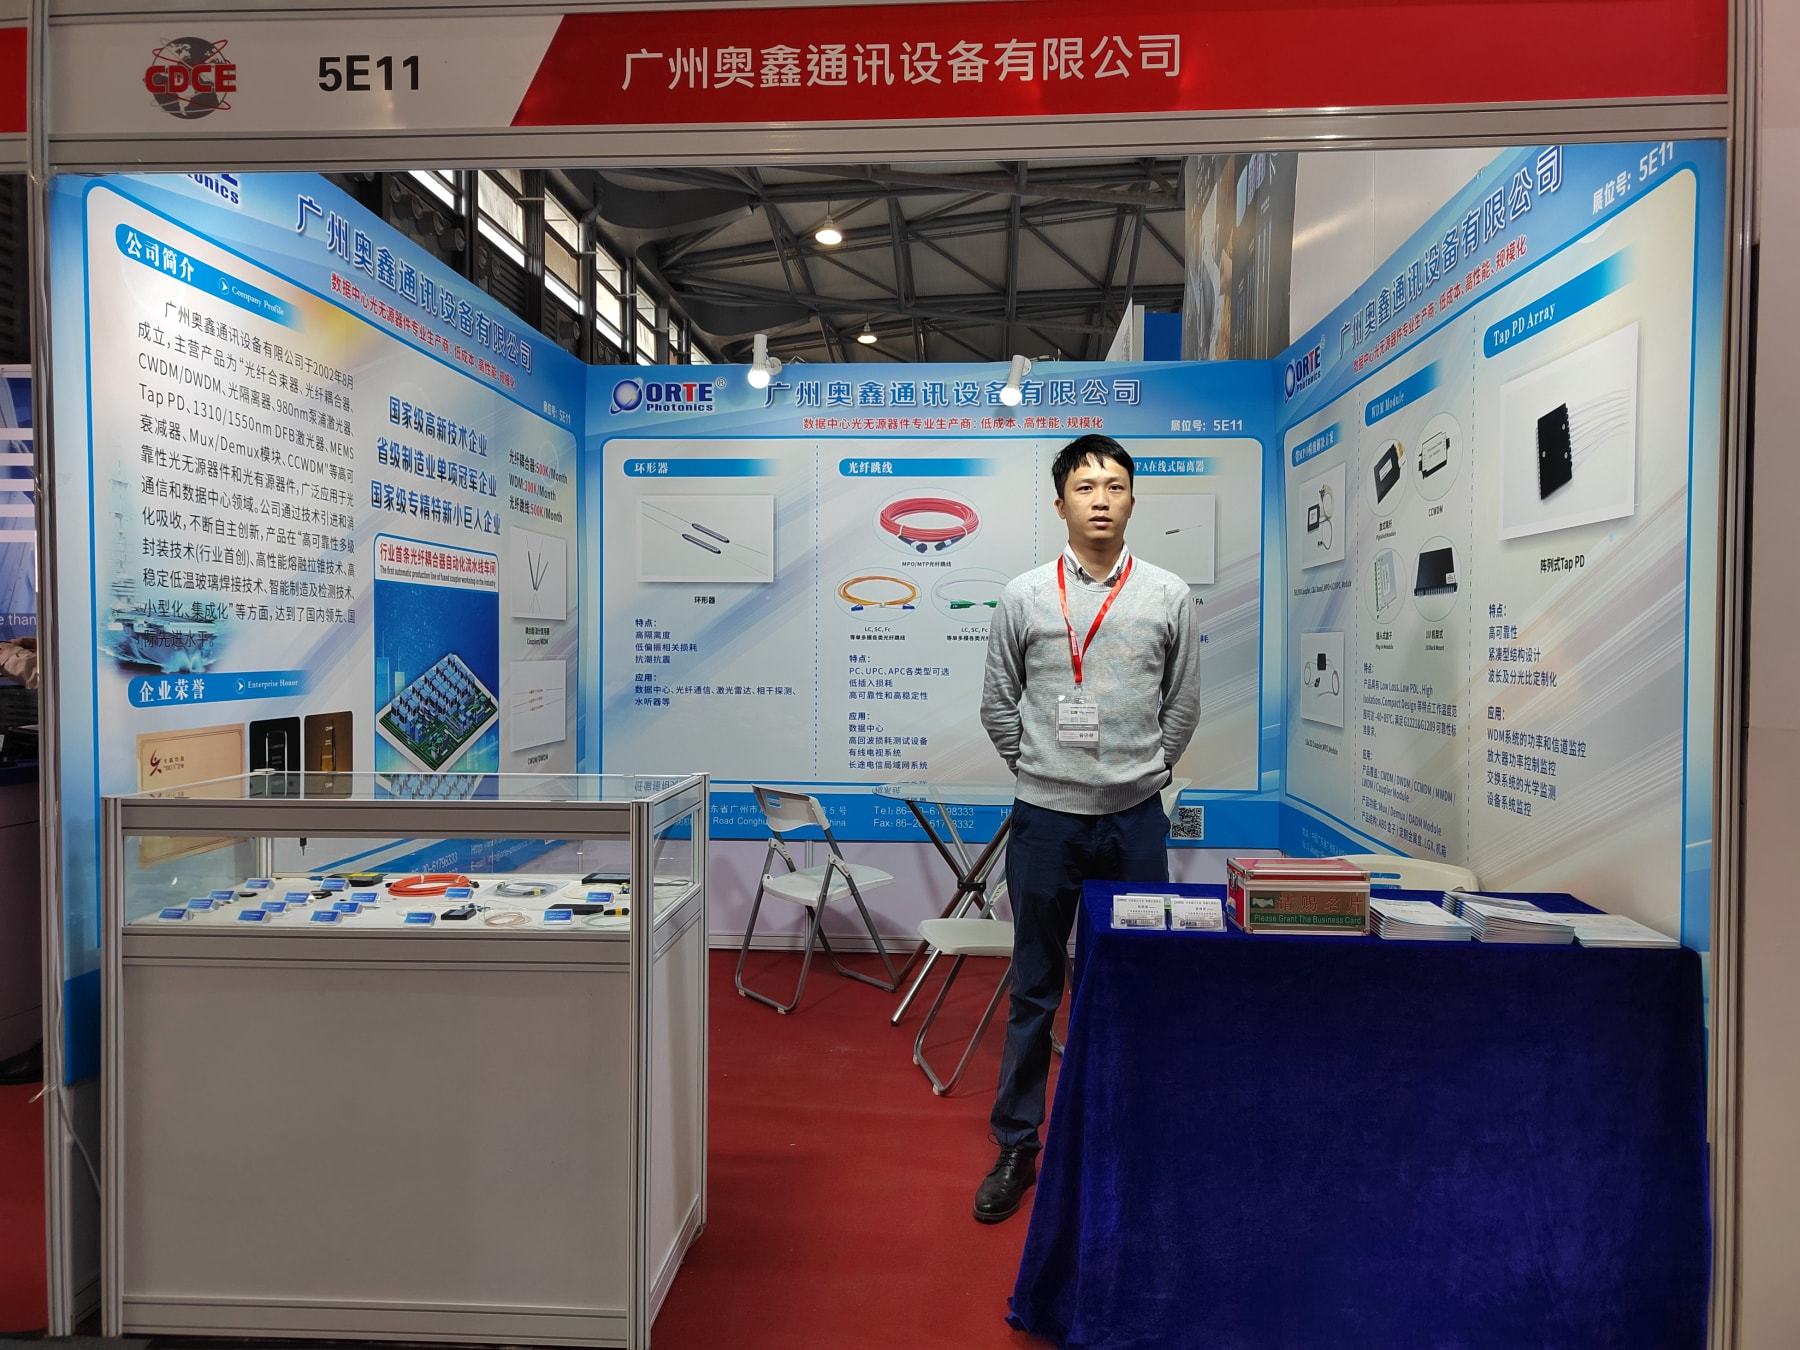 Review of Exhibitions at the 2023CDCE International Data Center Exhibition